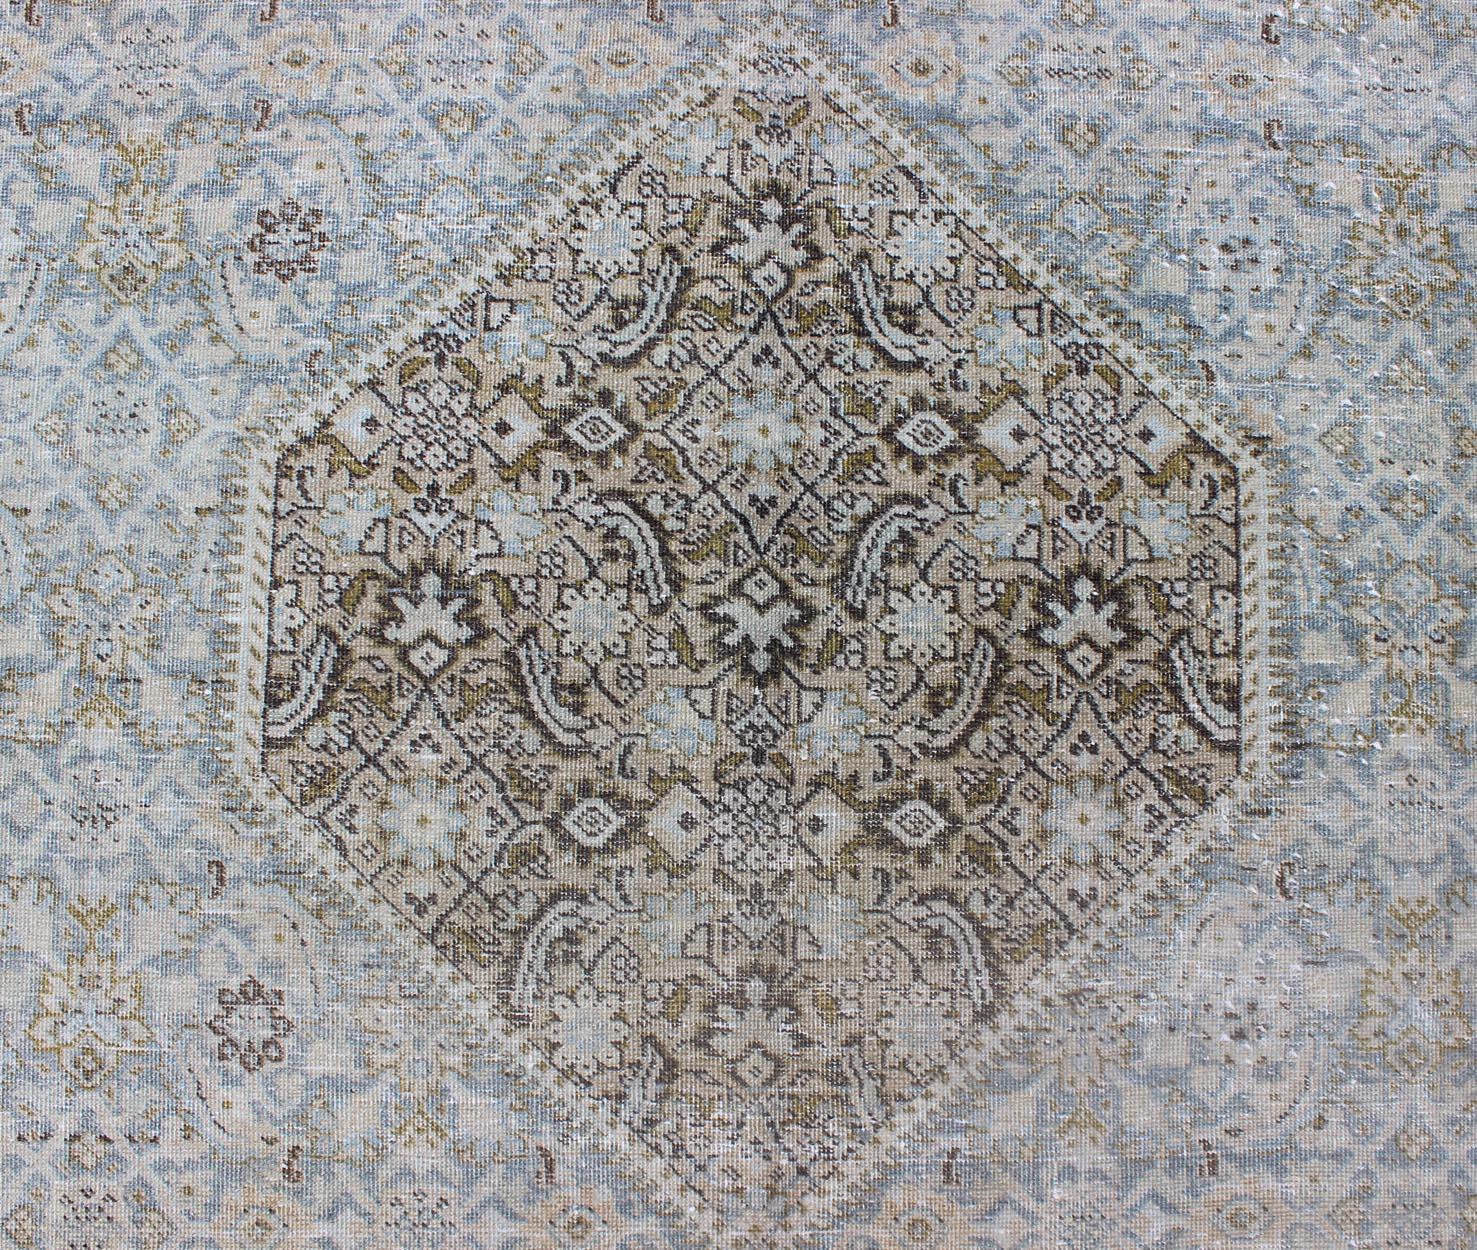 Antique Persian Tabriz Rug with Medallion in Light Blue, Tan and Brown Colors 2